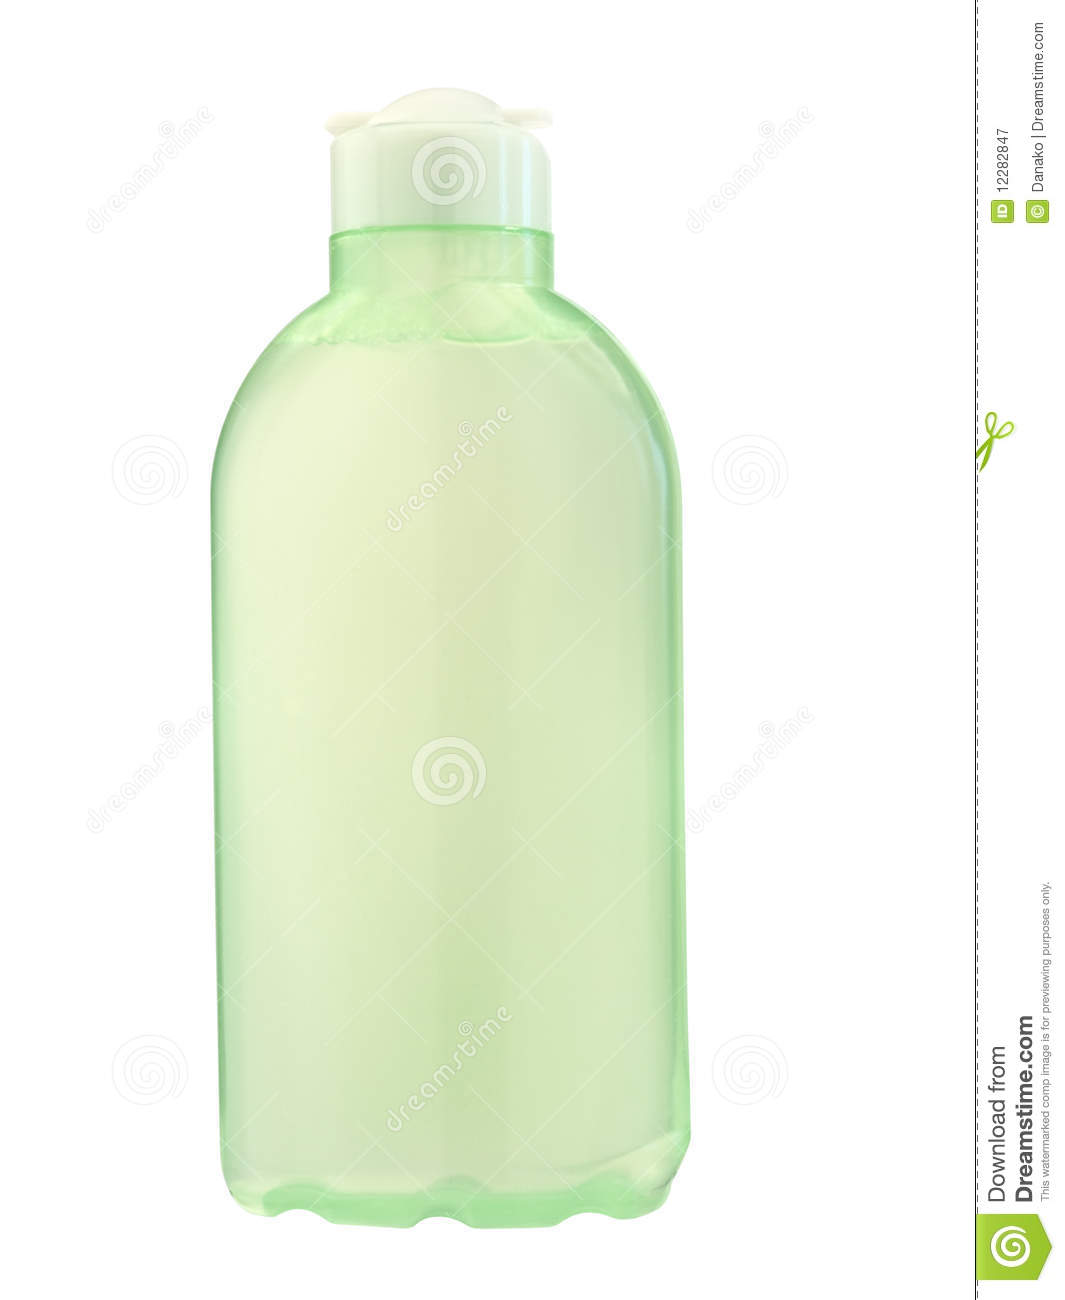 Plastic Container Royalty Free Stock Photography   Image  12282847